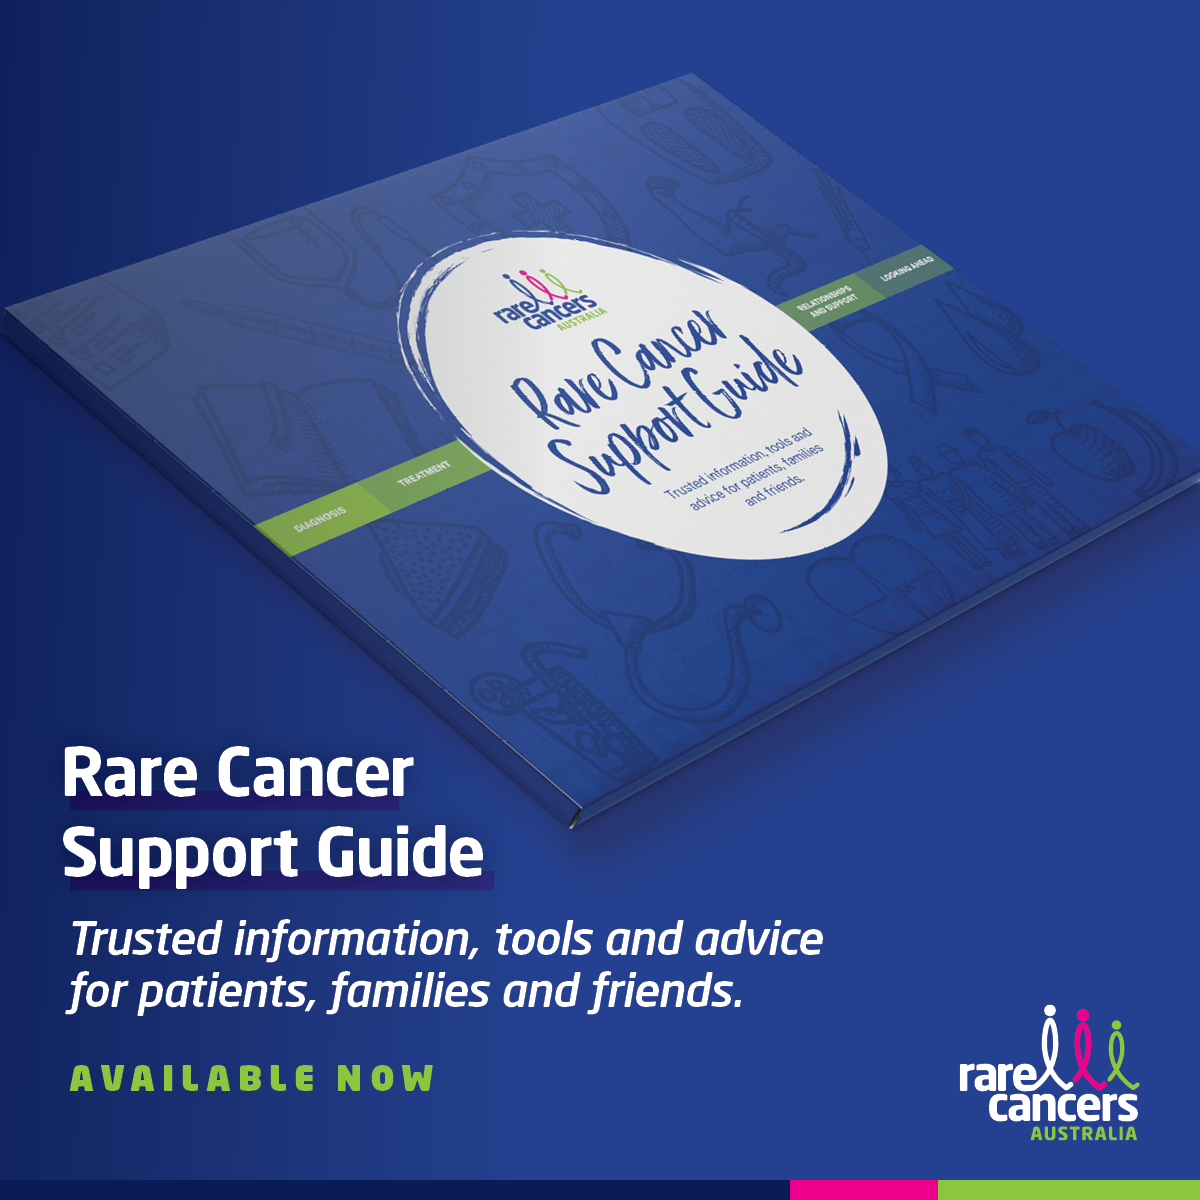 The Treatment section of the Rare Cancer Support Guide provides plain English explanations and advice on navigating our complex health system: bit.ly/3OInM2N #RCSG #cancersupport